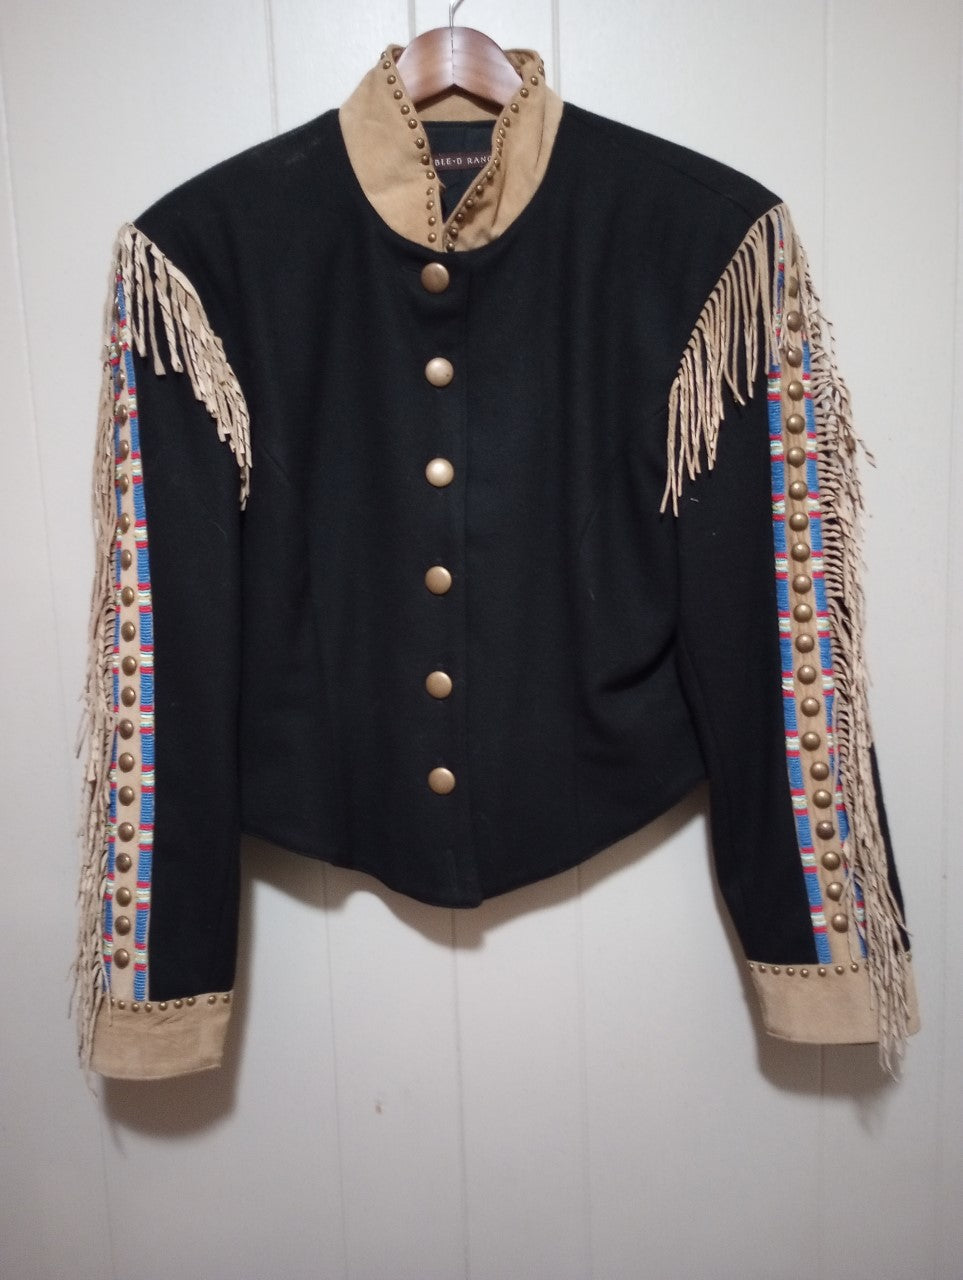 Vintage Double D Ranchwear Wool and Suede Leather Beaded Jacket